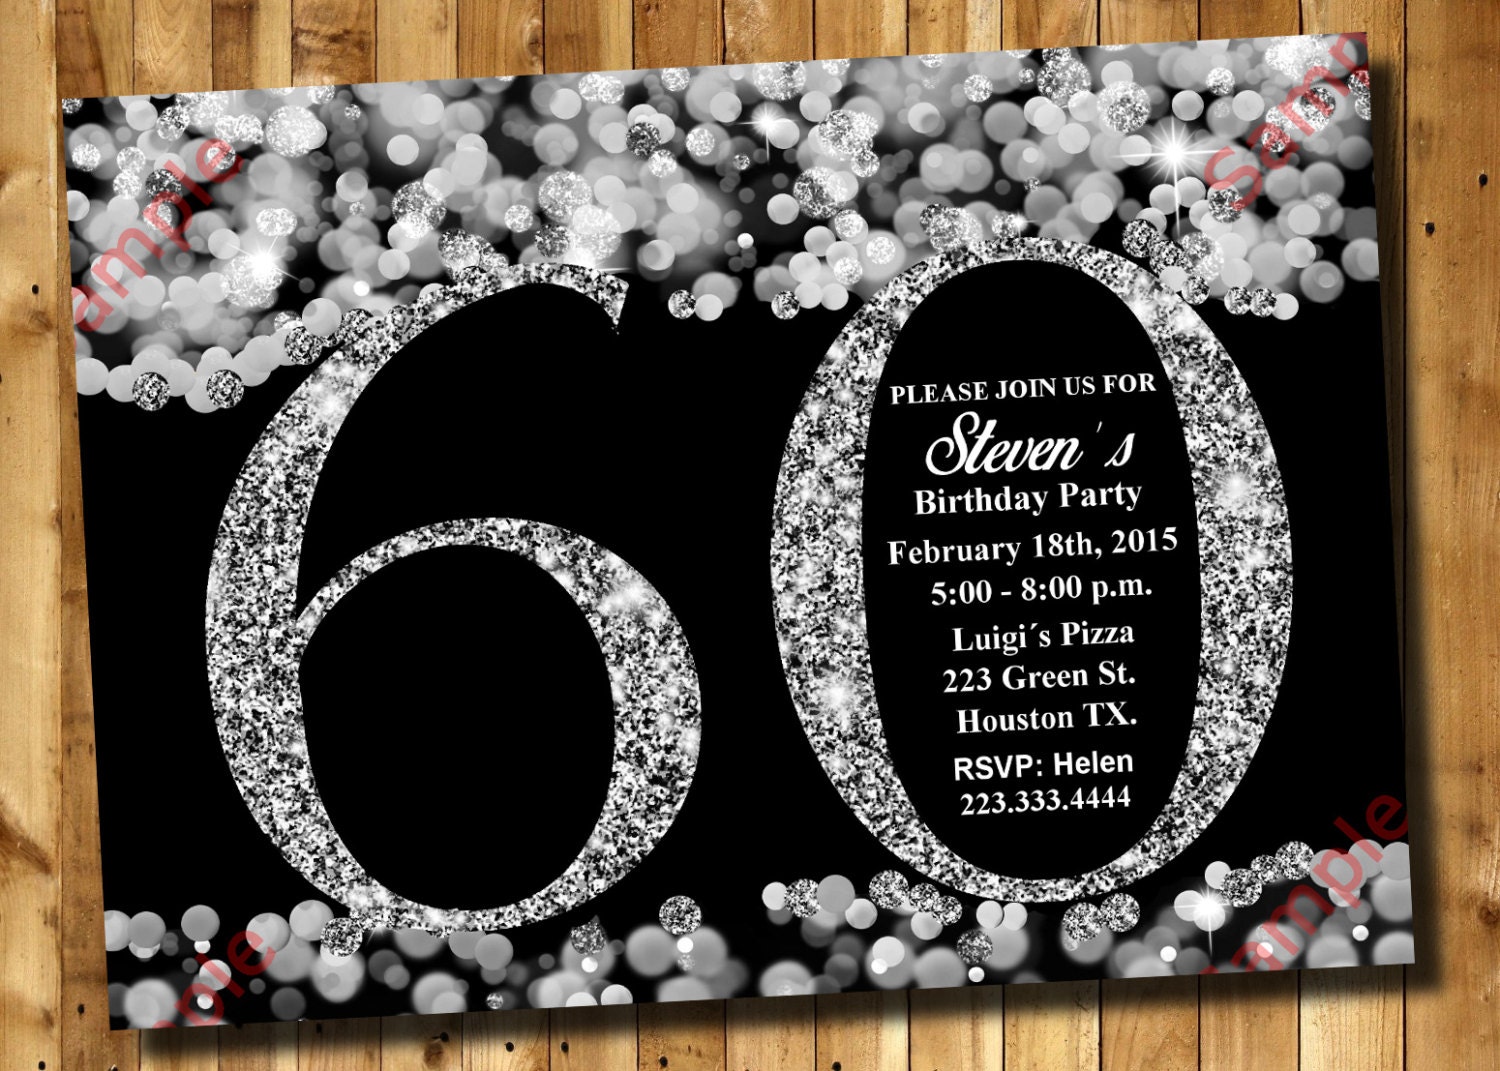 60th birthday party invitations free downloadable templates - vilthreads